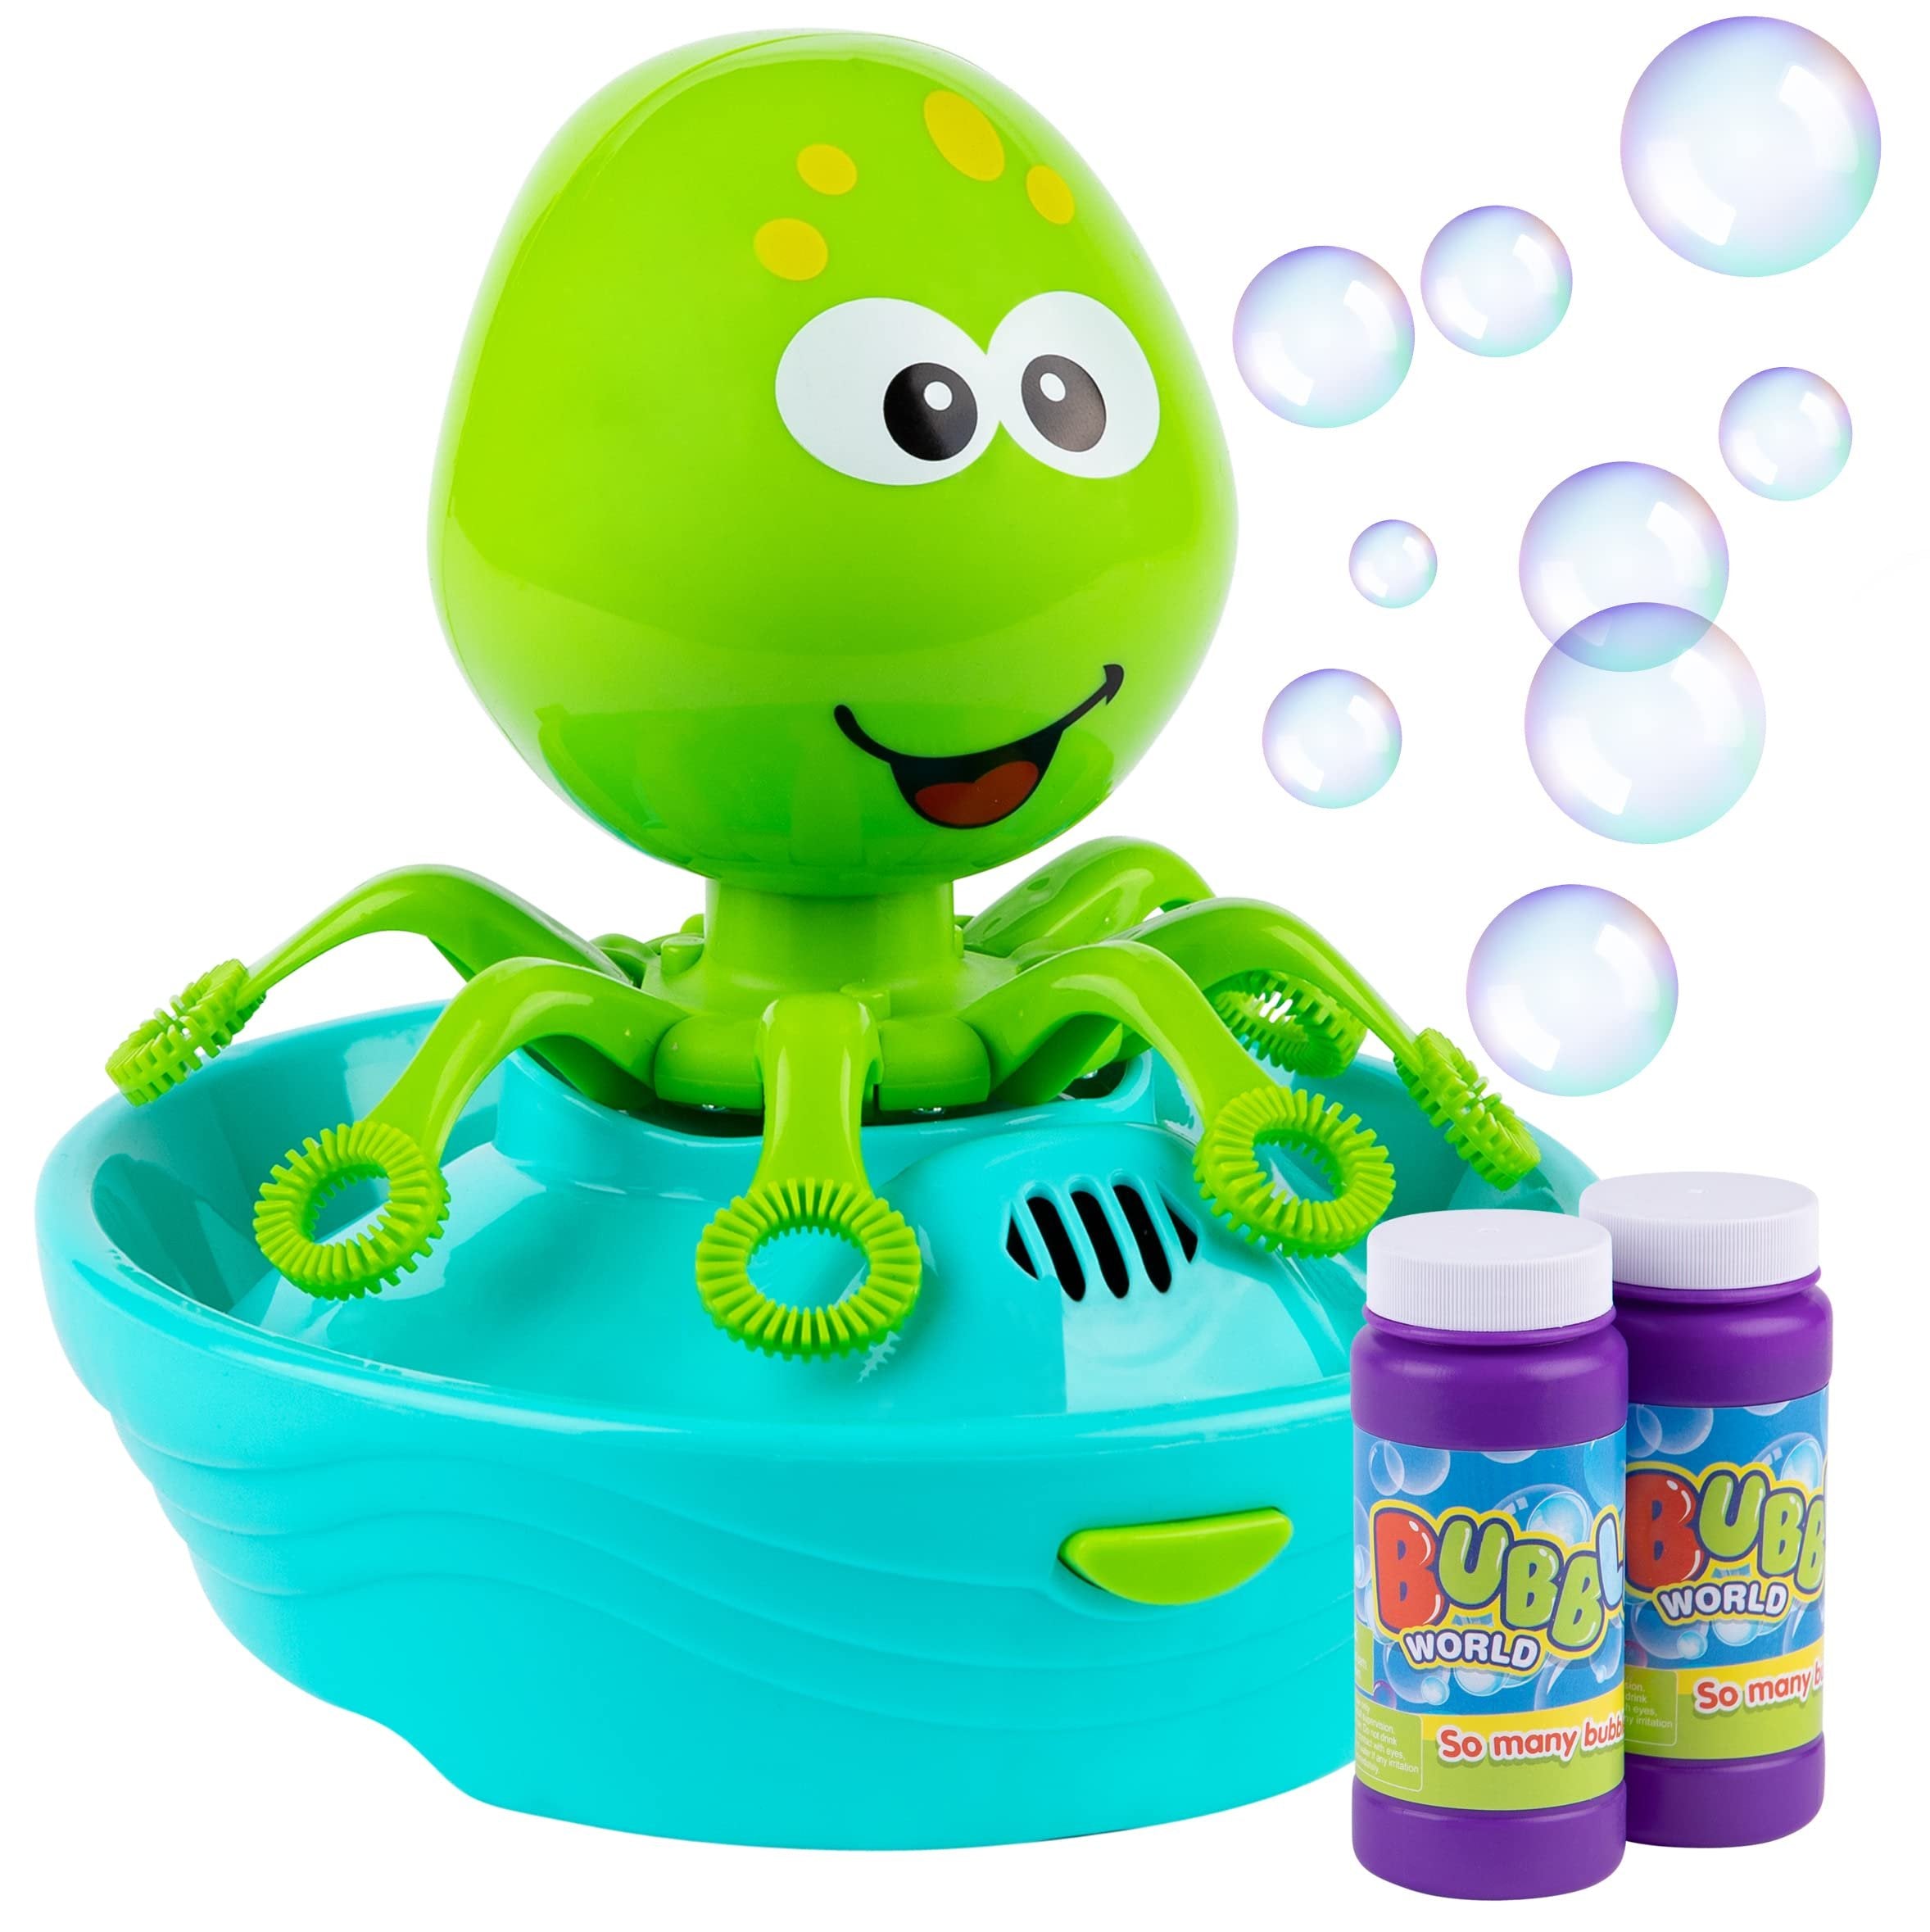 Octopus Bubble Maker Machine with Bubbles Solutions Bubble Blowing for Fun Summer Outdoor or Party Activity for Kids and Toddlers